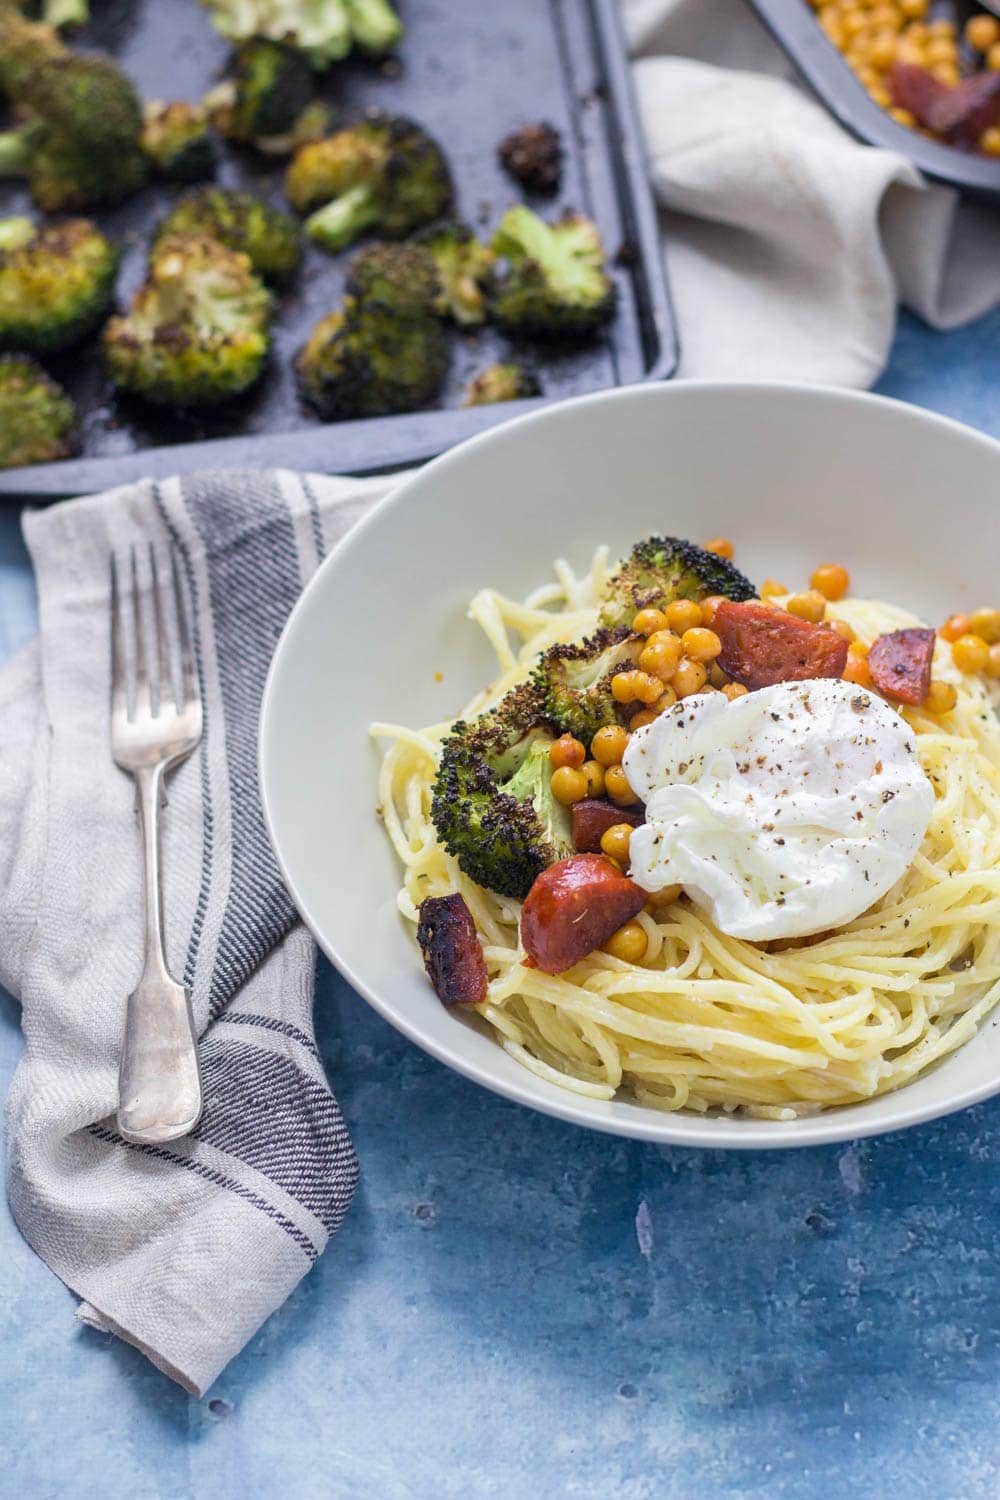 A simple weeknight meal packed with garlicky flavour and topped with delicious roasted broccoli, crispy chickpeas and chorizo. Finished with a poached egg.